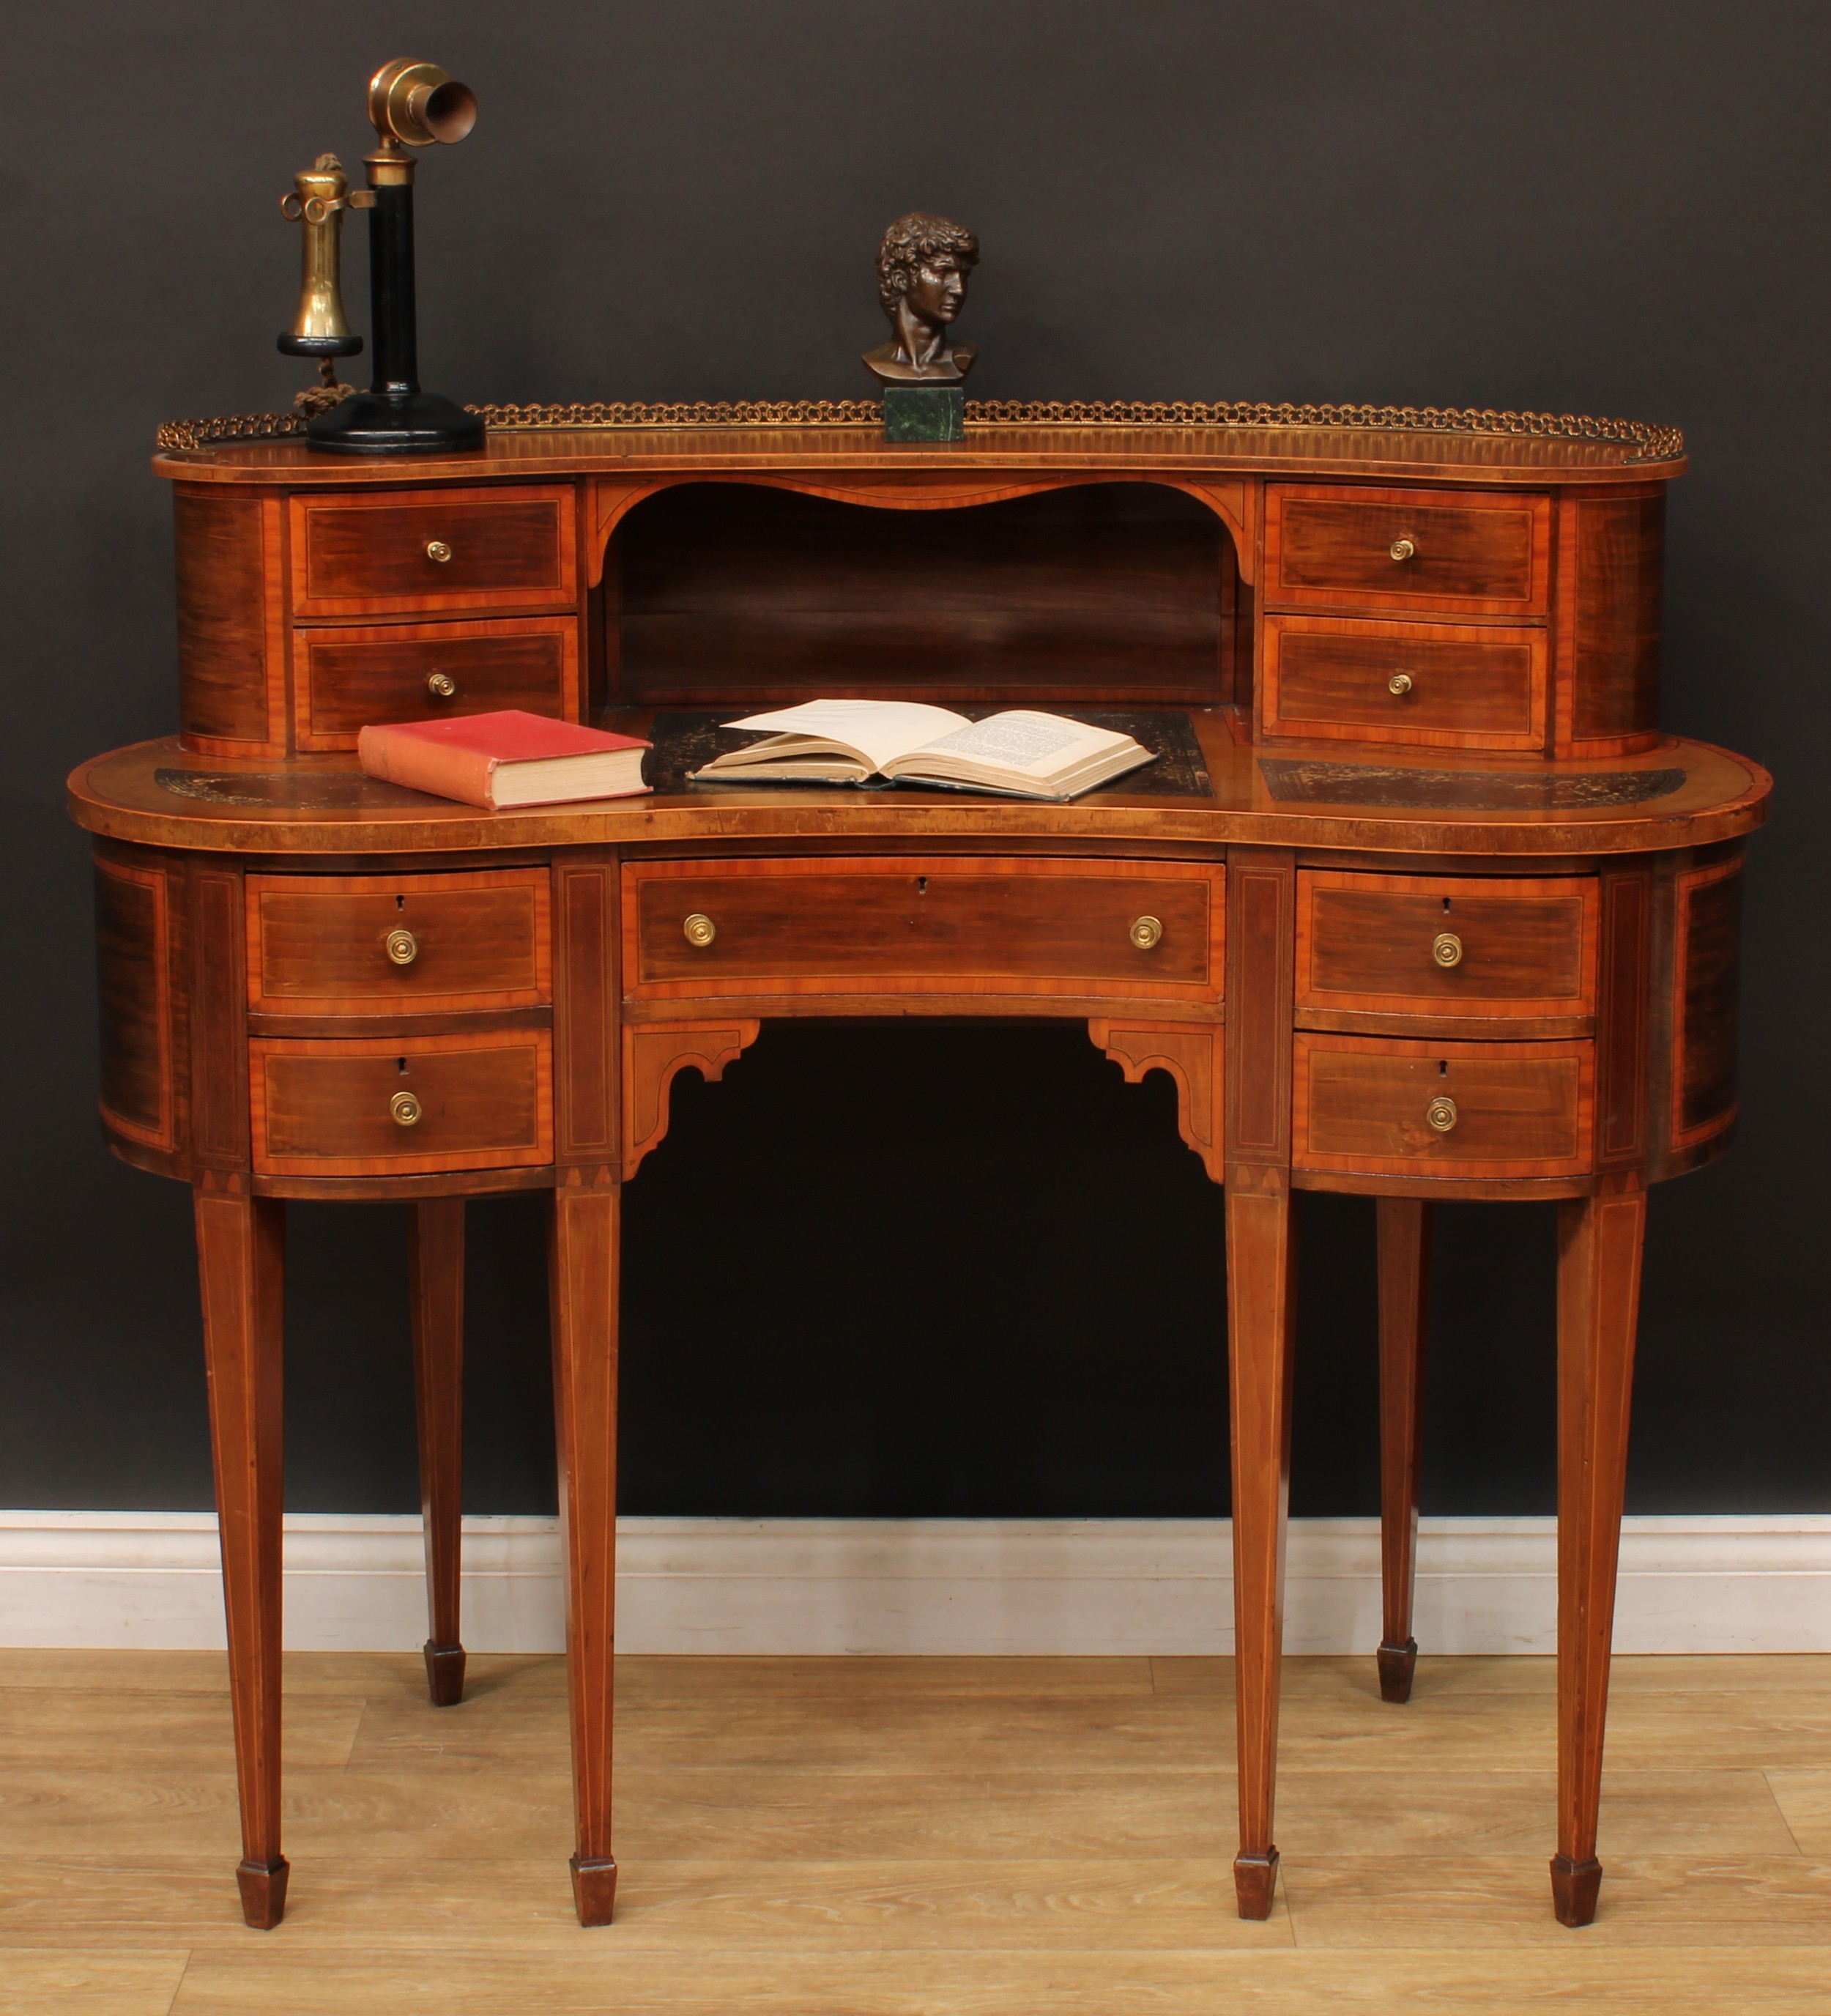 An Edwardian satinwood crossbanded kidney-shaped Carlton House type desk, shaped superstructure with